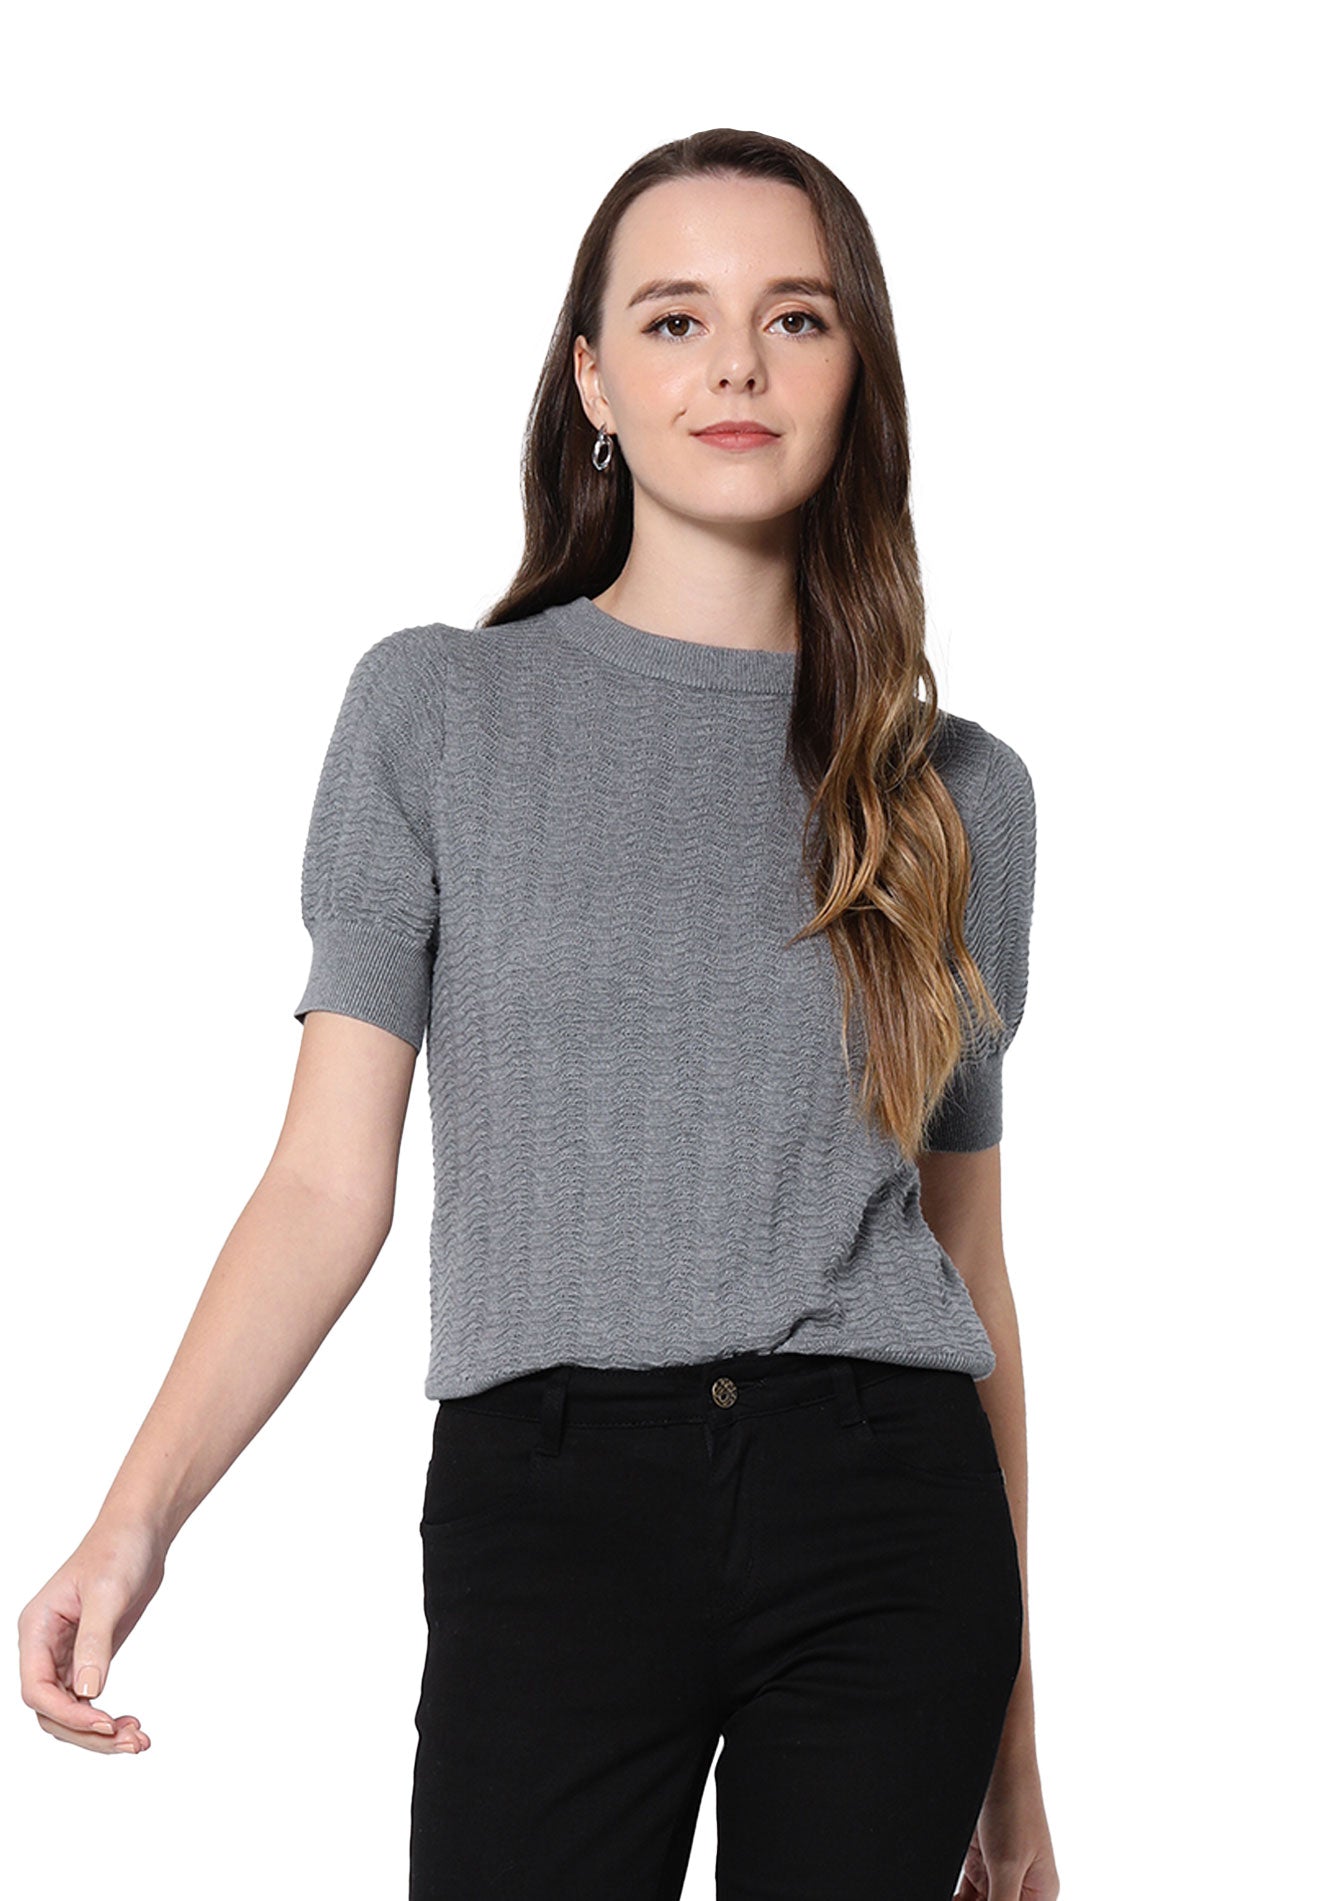 VOIR JEANS Weave Ribbed Yarn Knit Top